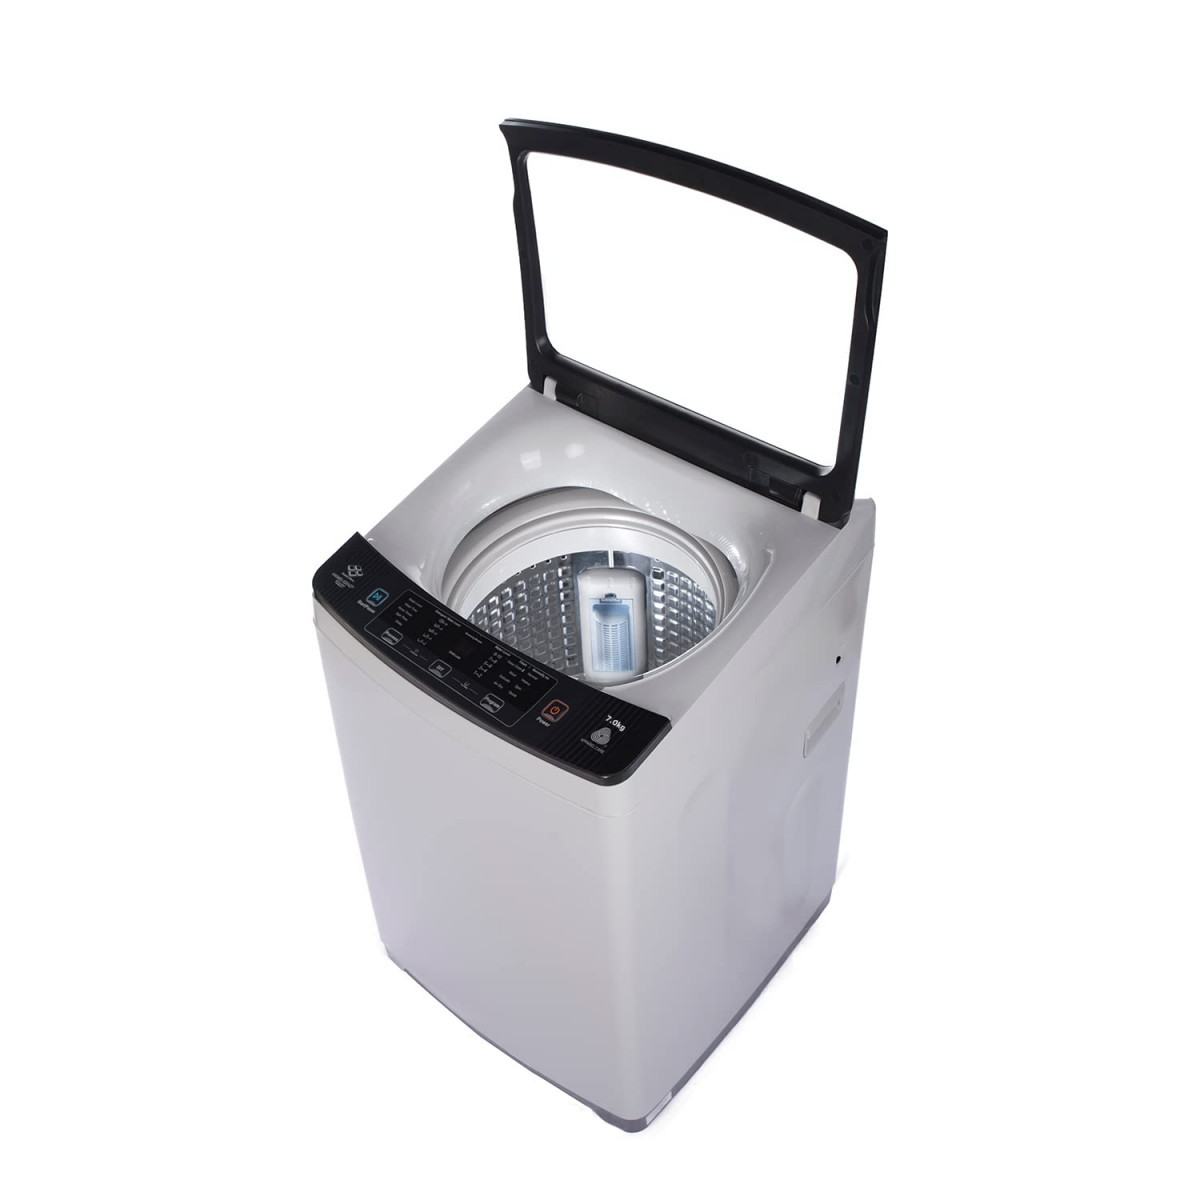 Haier HWM70-826NZP 7 Kg Fully-Automatic Top Loading Washing Machine with Softfall Technology Dual Magic Filter Moonlight Grey Quick Wash